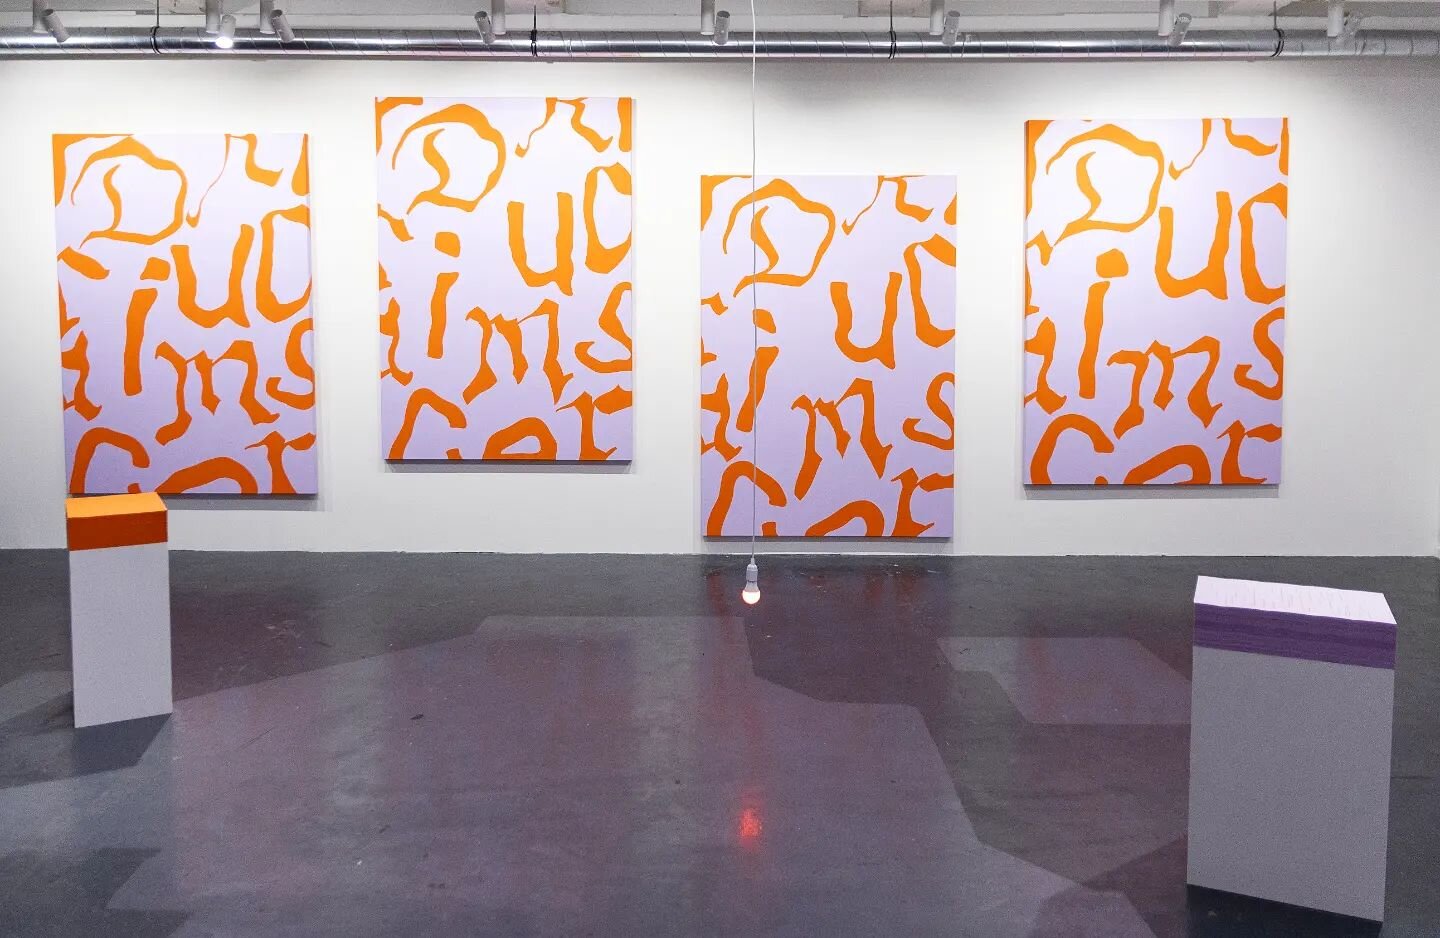 Thinking back to my MFA grad show work at Slash Gallery last summer...
You have to keep changing the way I address you, the way you address me
Oil on canvas, five parts, each 140 x 200cm; with printed stacks of text works, edition of 1500, 29.7 x 42c